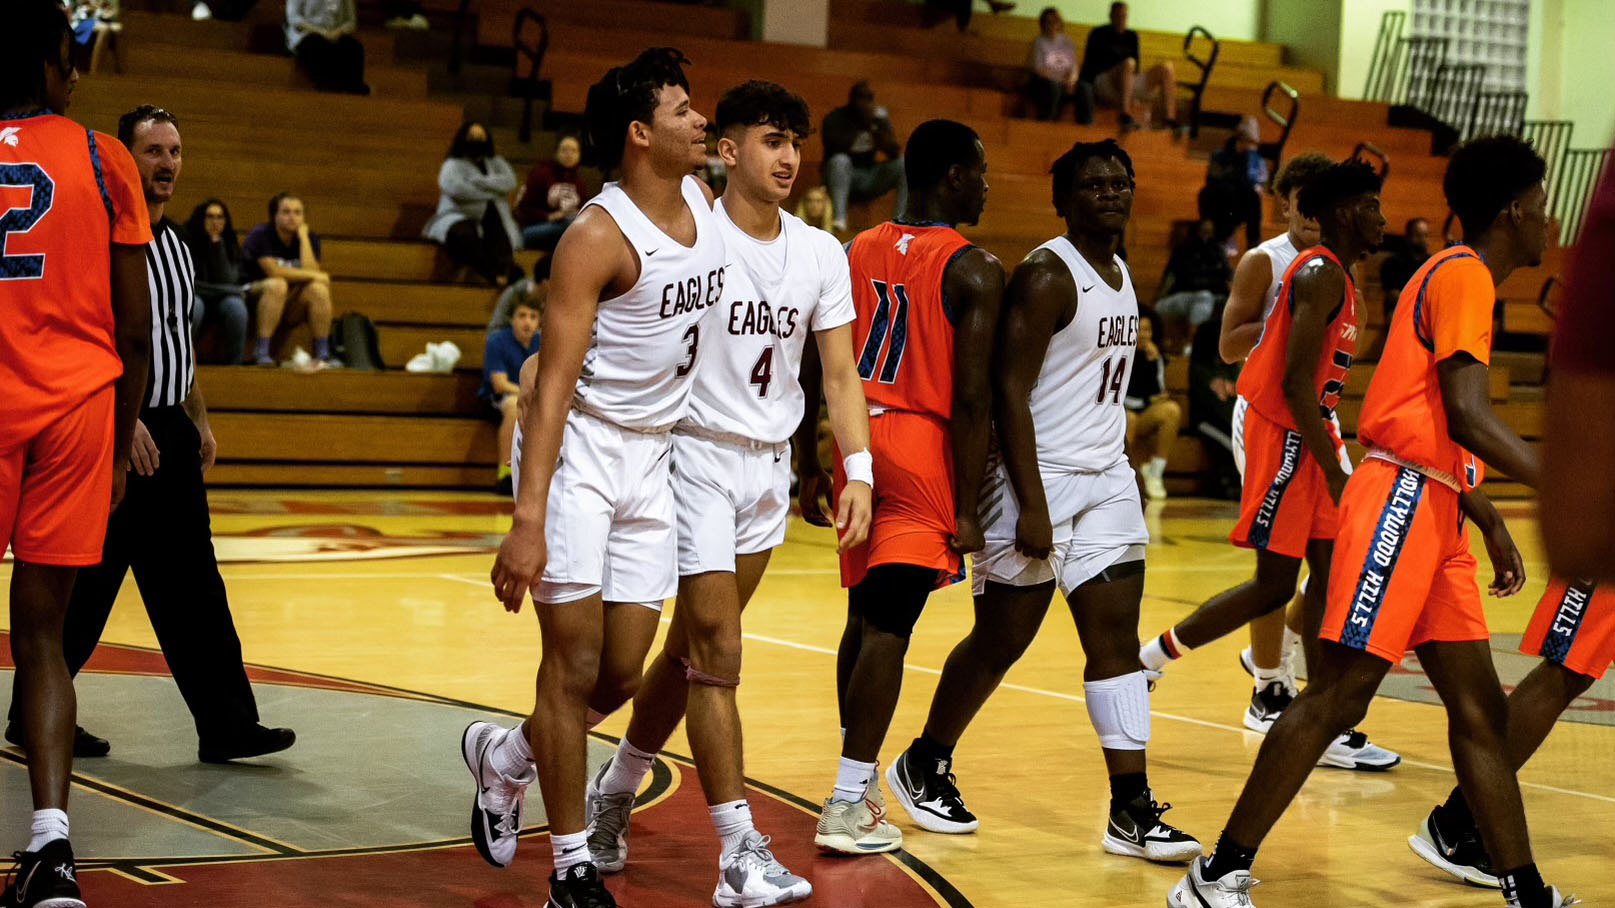 Marjory Stoneman Douglas Boys Basketball Undefeated in December After 2 Wins in Holiday Tournament